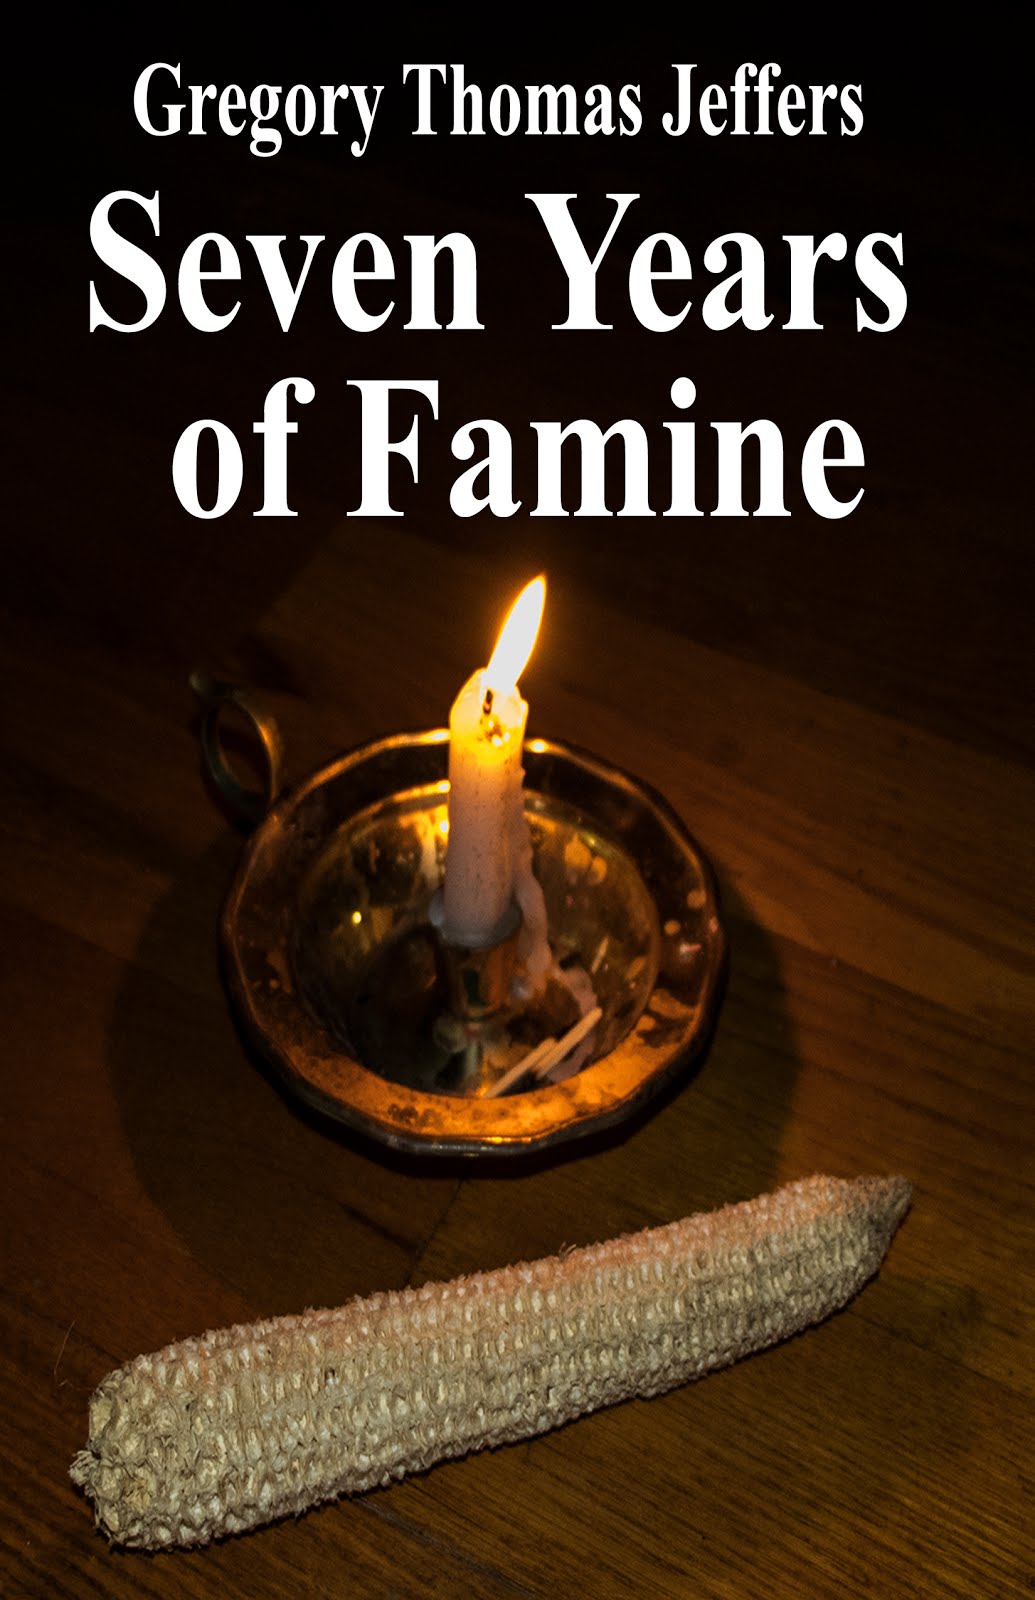 Seven Years of Famine